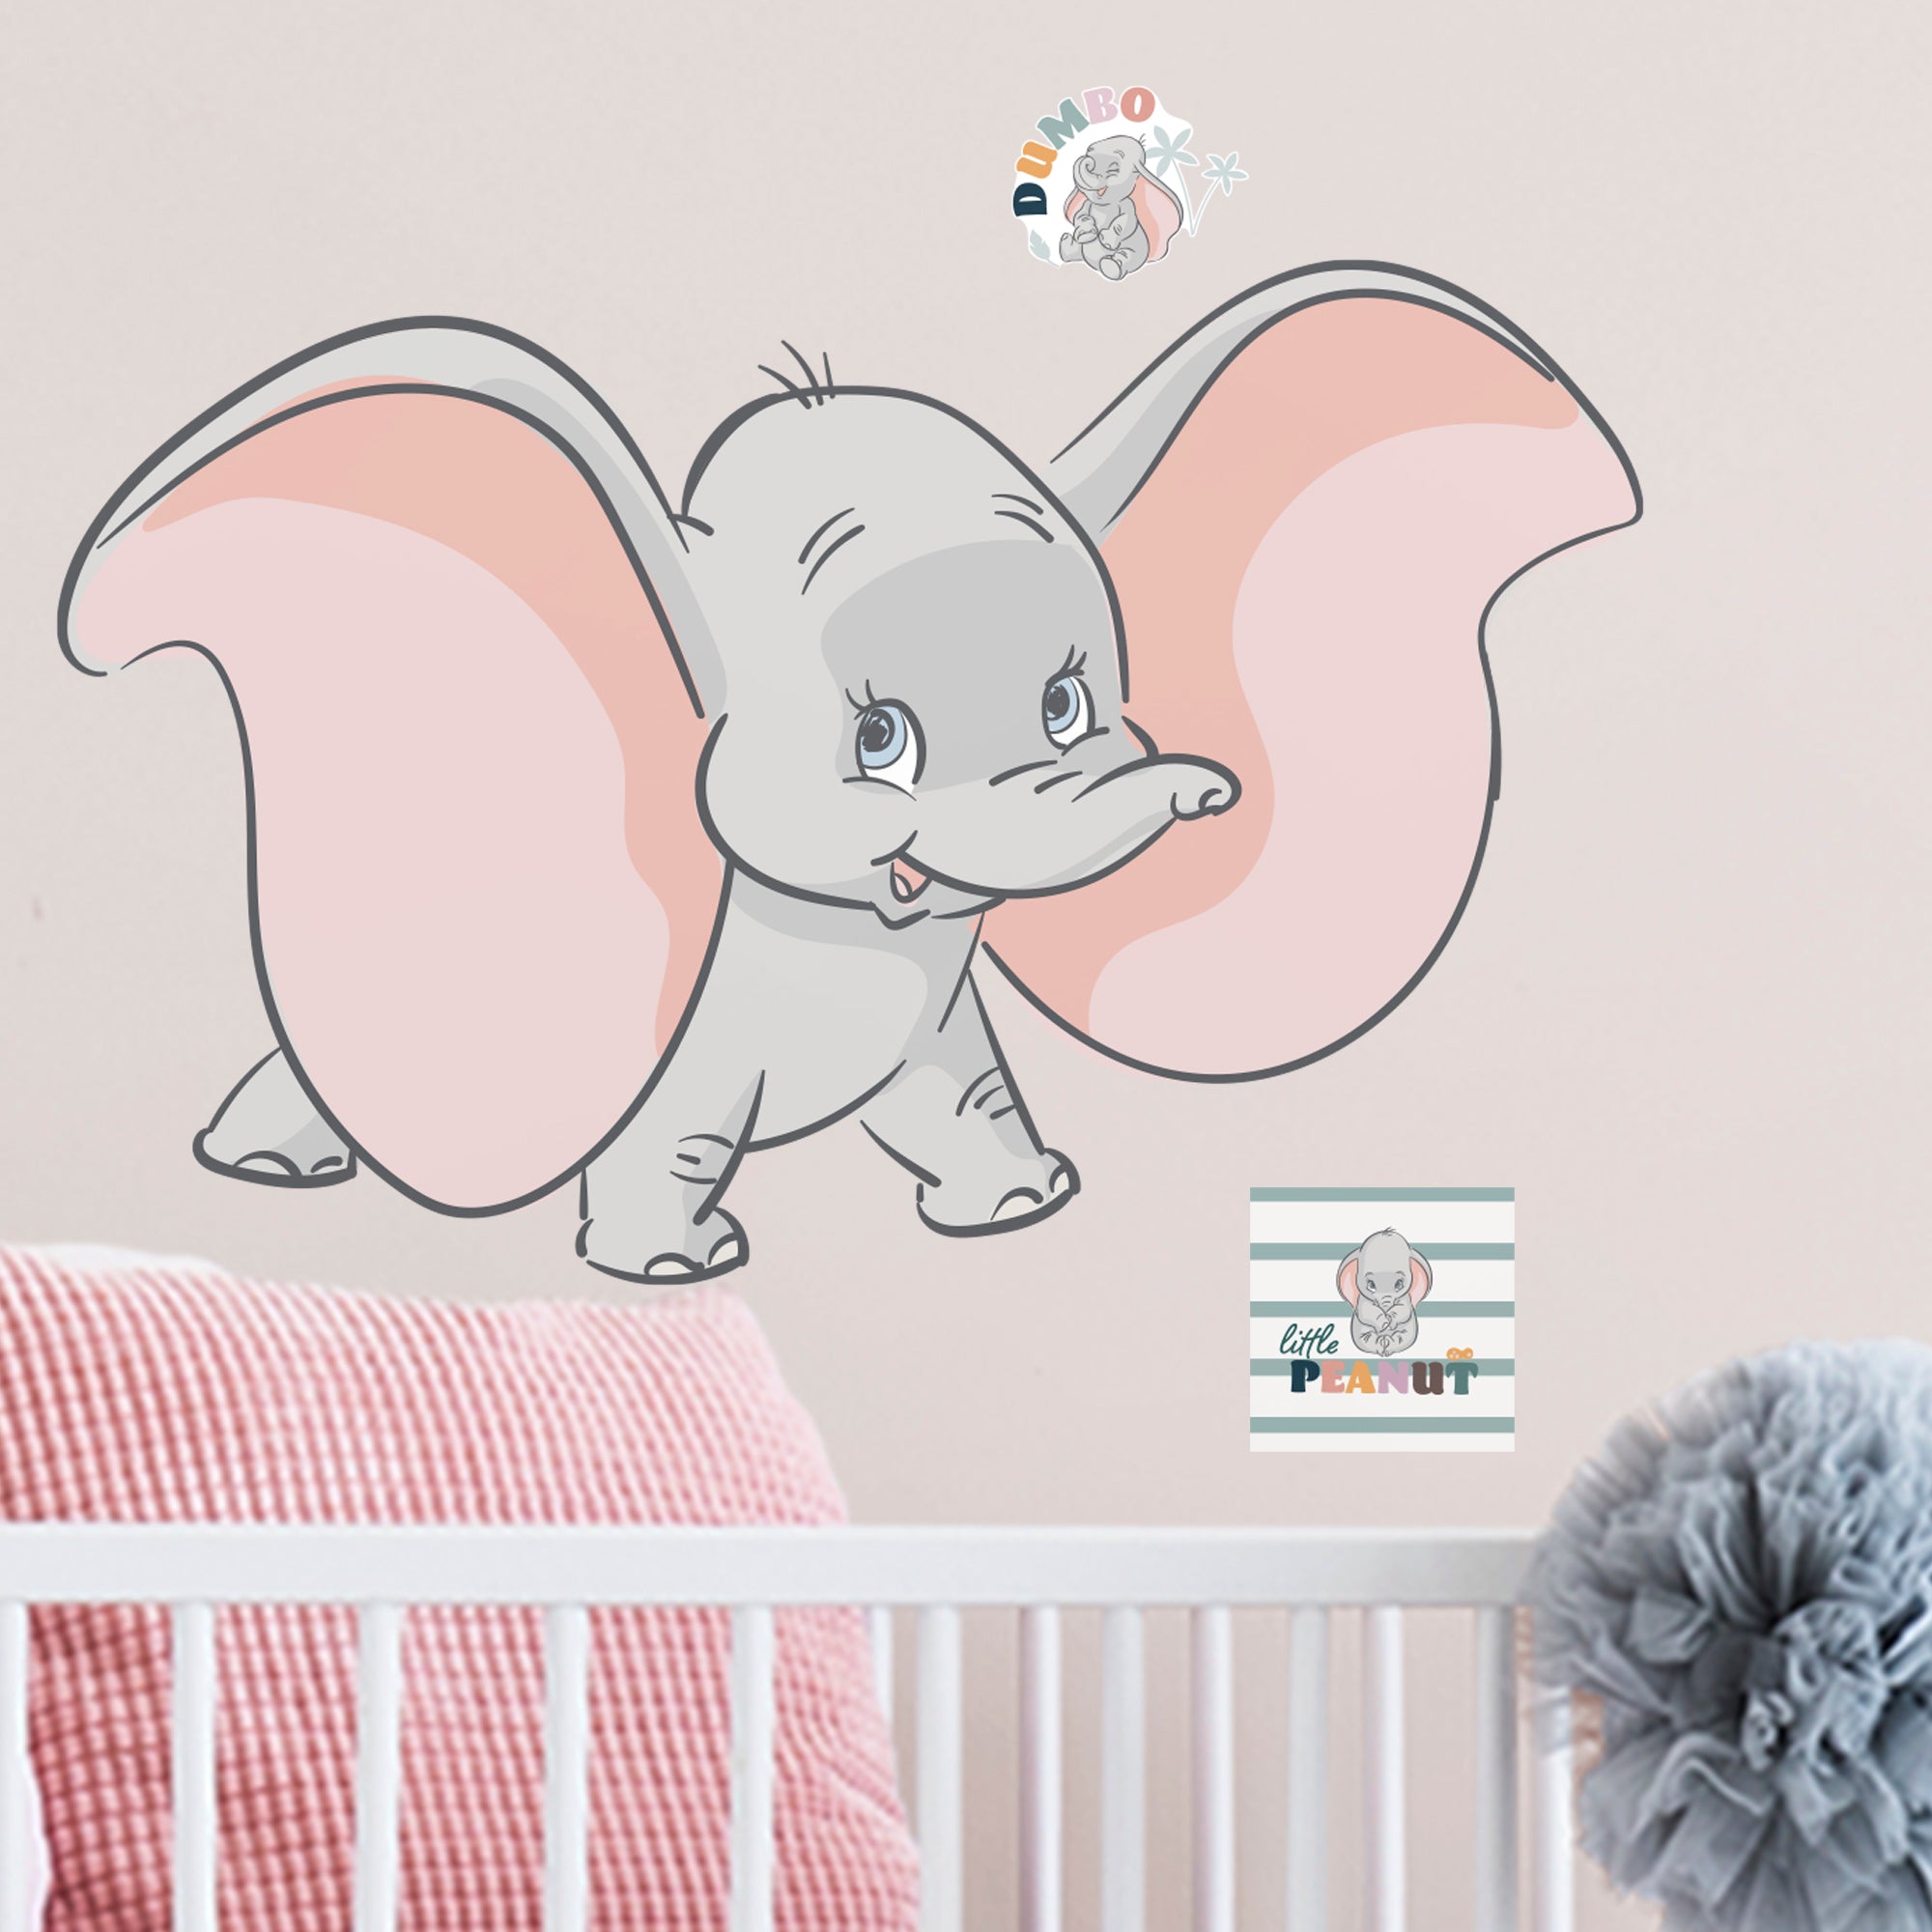 Dumbo Before the Bloom - Officially Licensed Disney Removable Wall Decal Large by Fathead | Vinyl